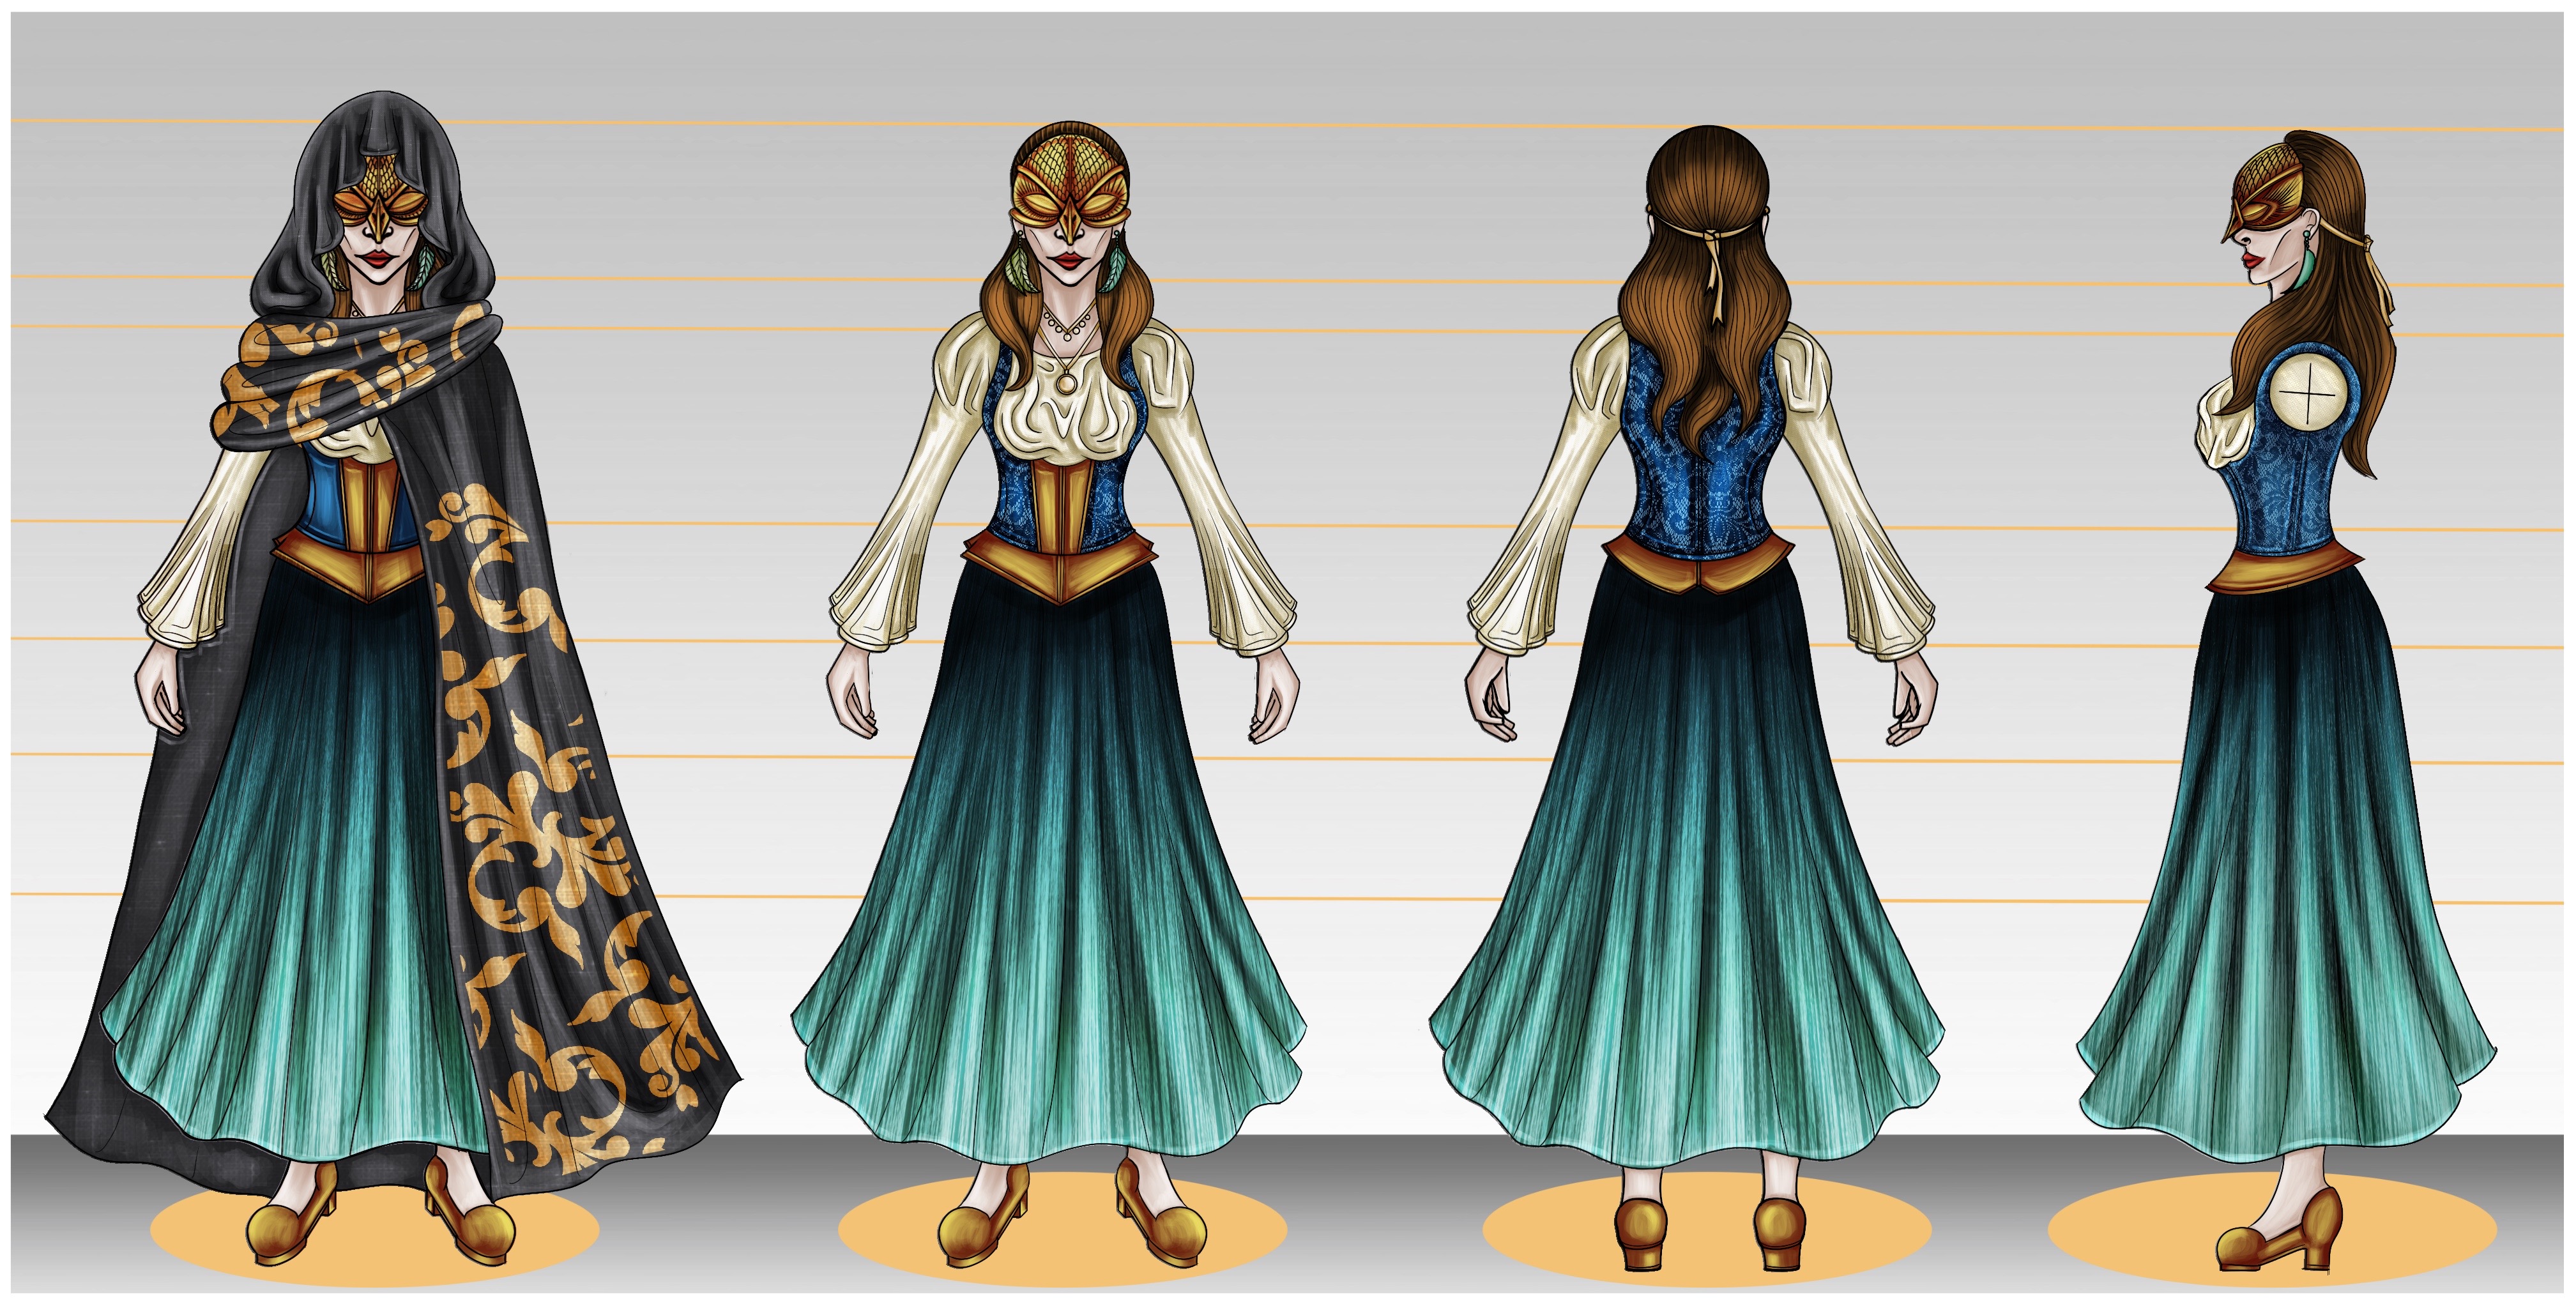 A landscape sheet featuring the same woman from four different angles: Front, Back, left-side, and right-side. The front view is duplicated to show a caped variant.